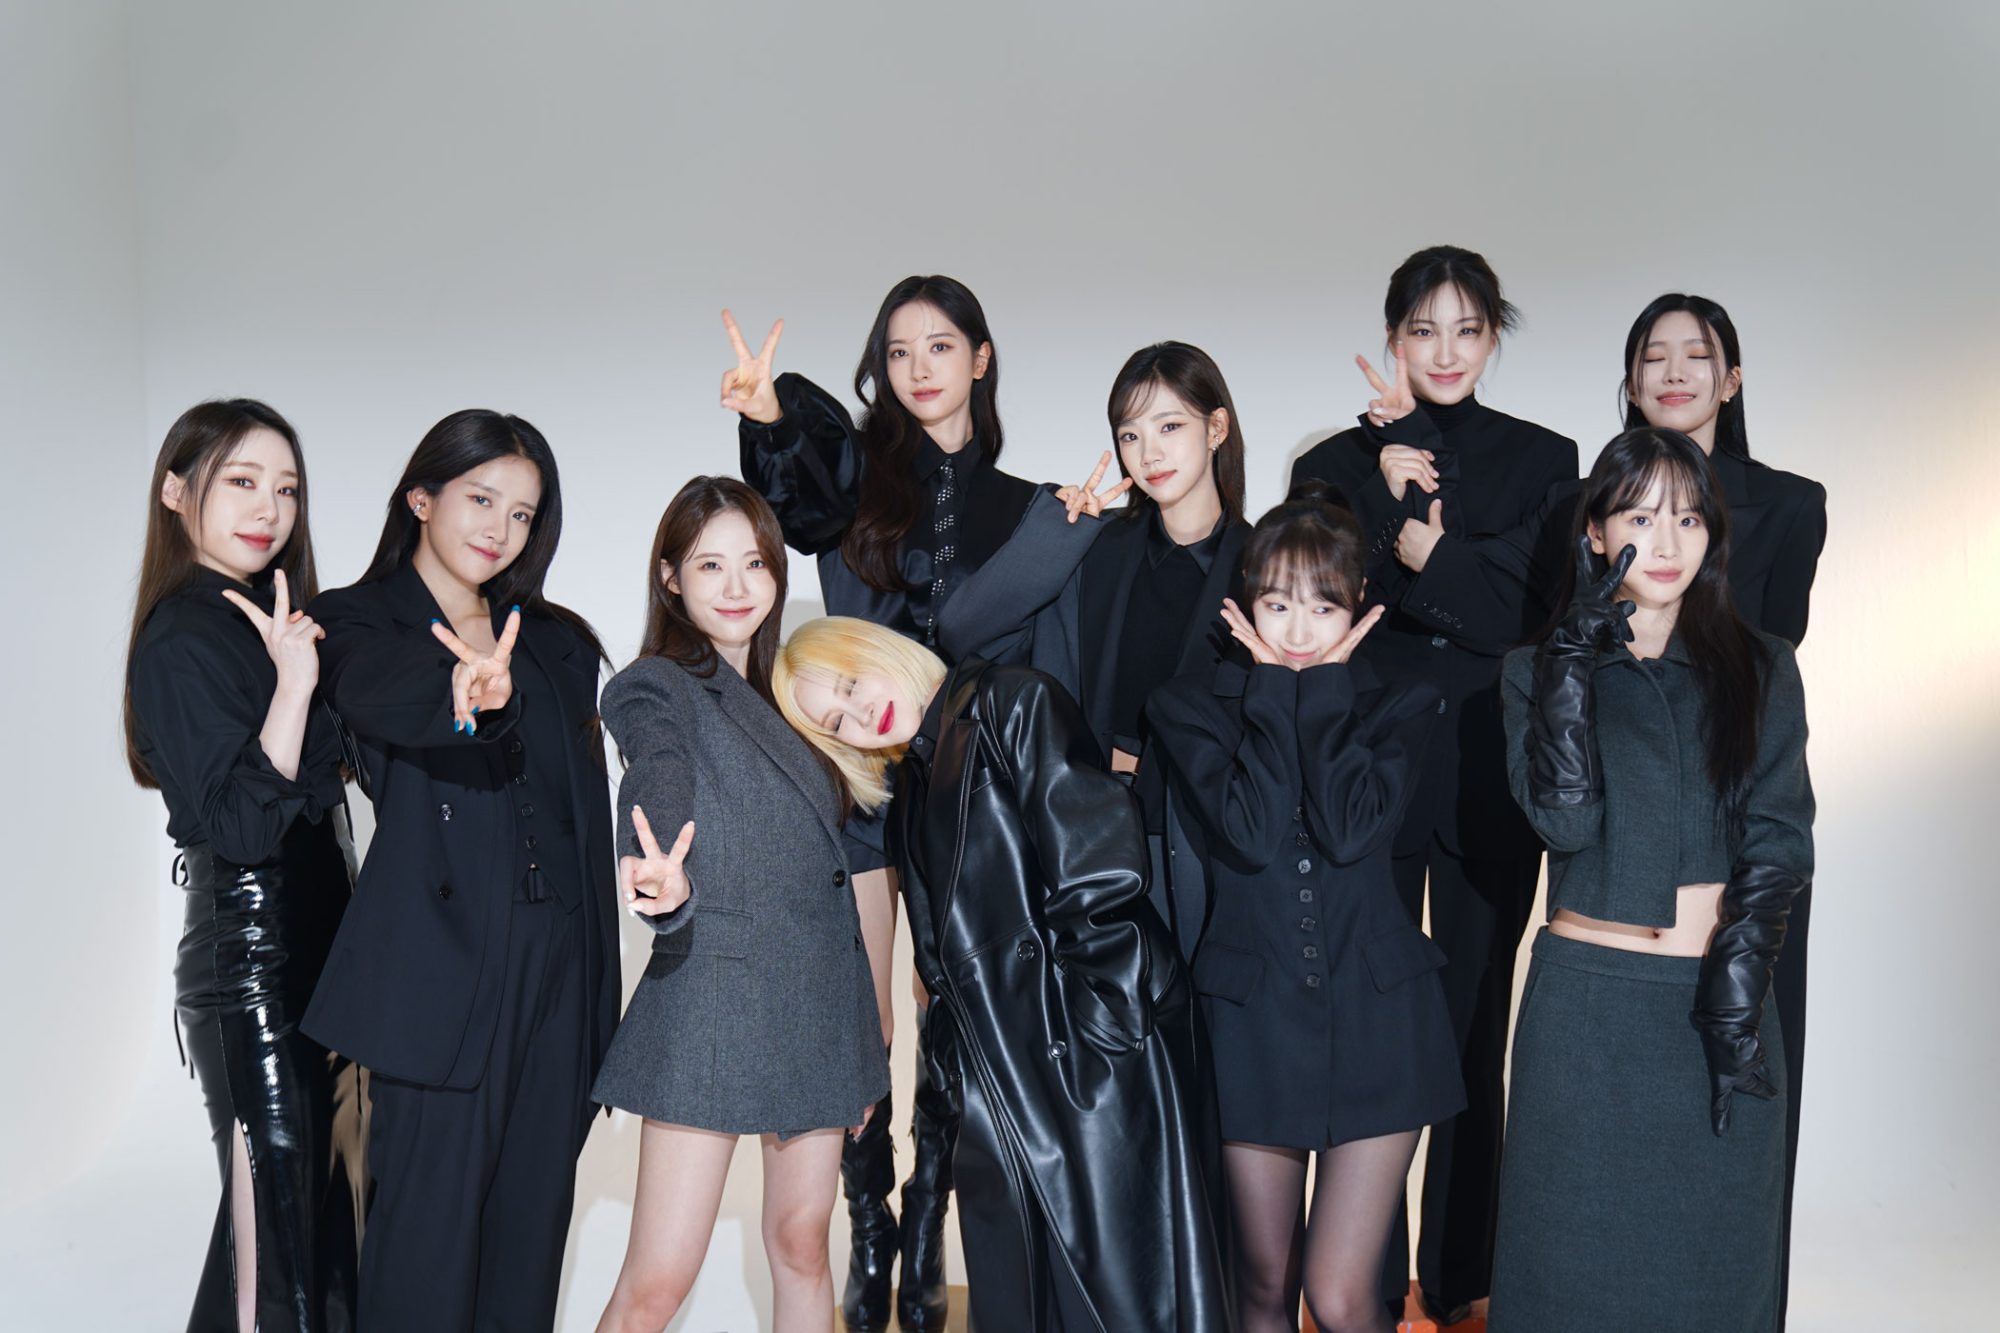 WJSN survived the 7 year curse with 8 members